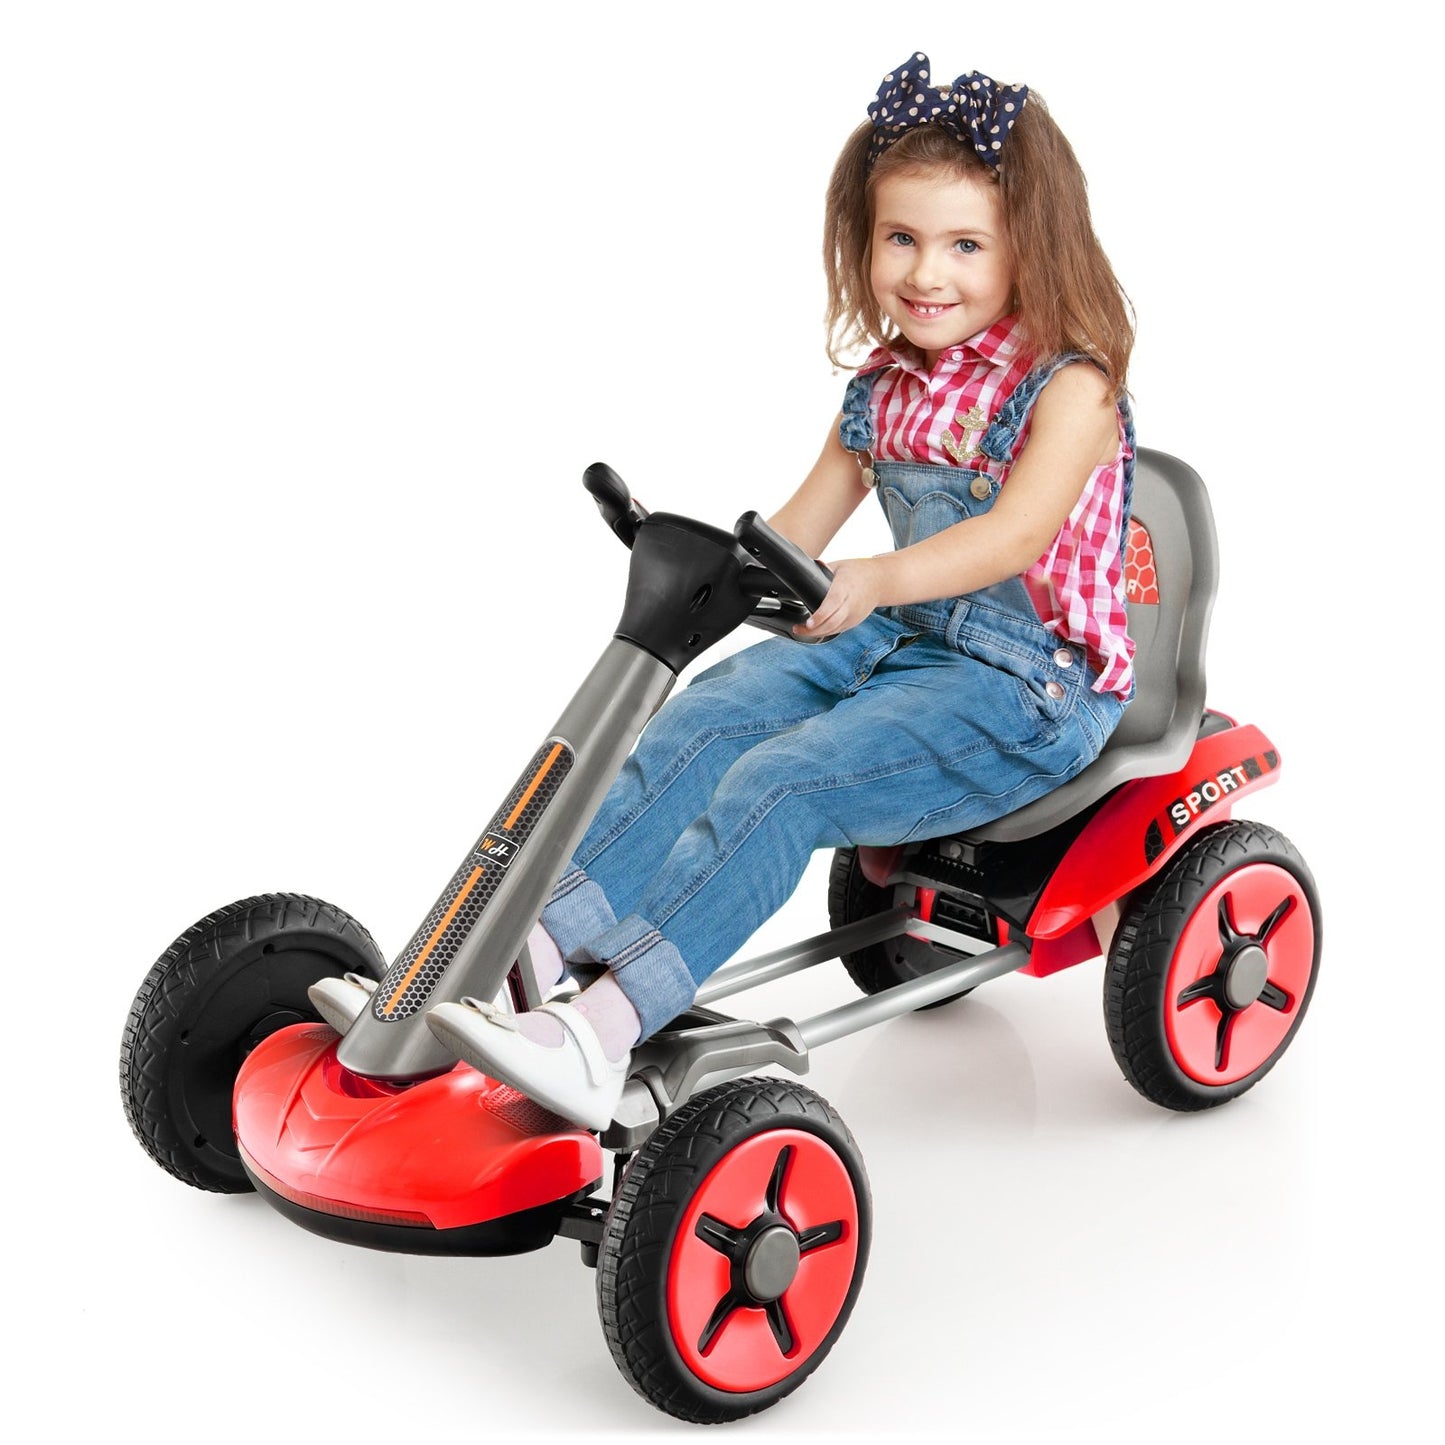 Pedal Powered 4-Wheel Toy Car with Adjustable Steering Wheel and Seat, Red